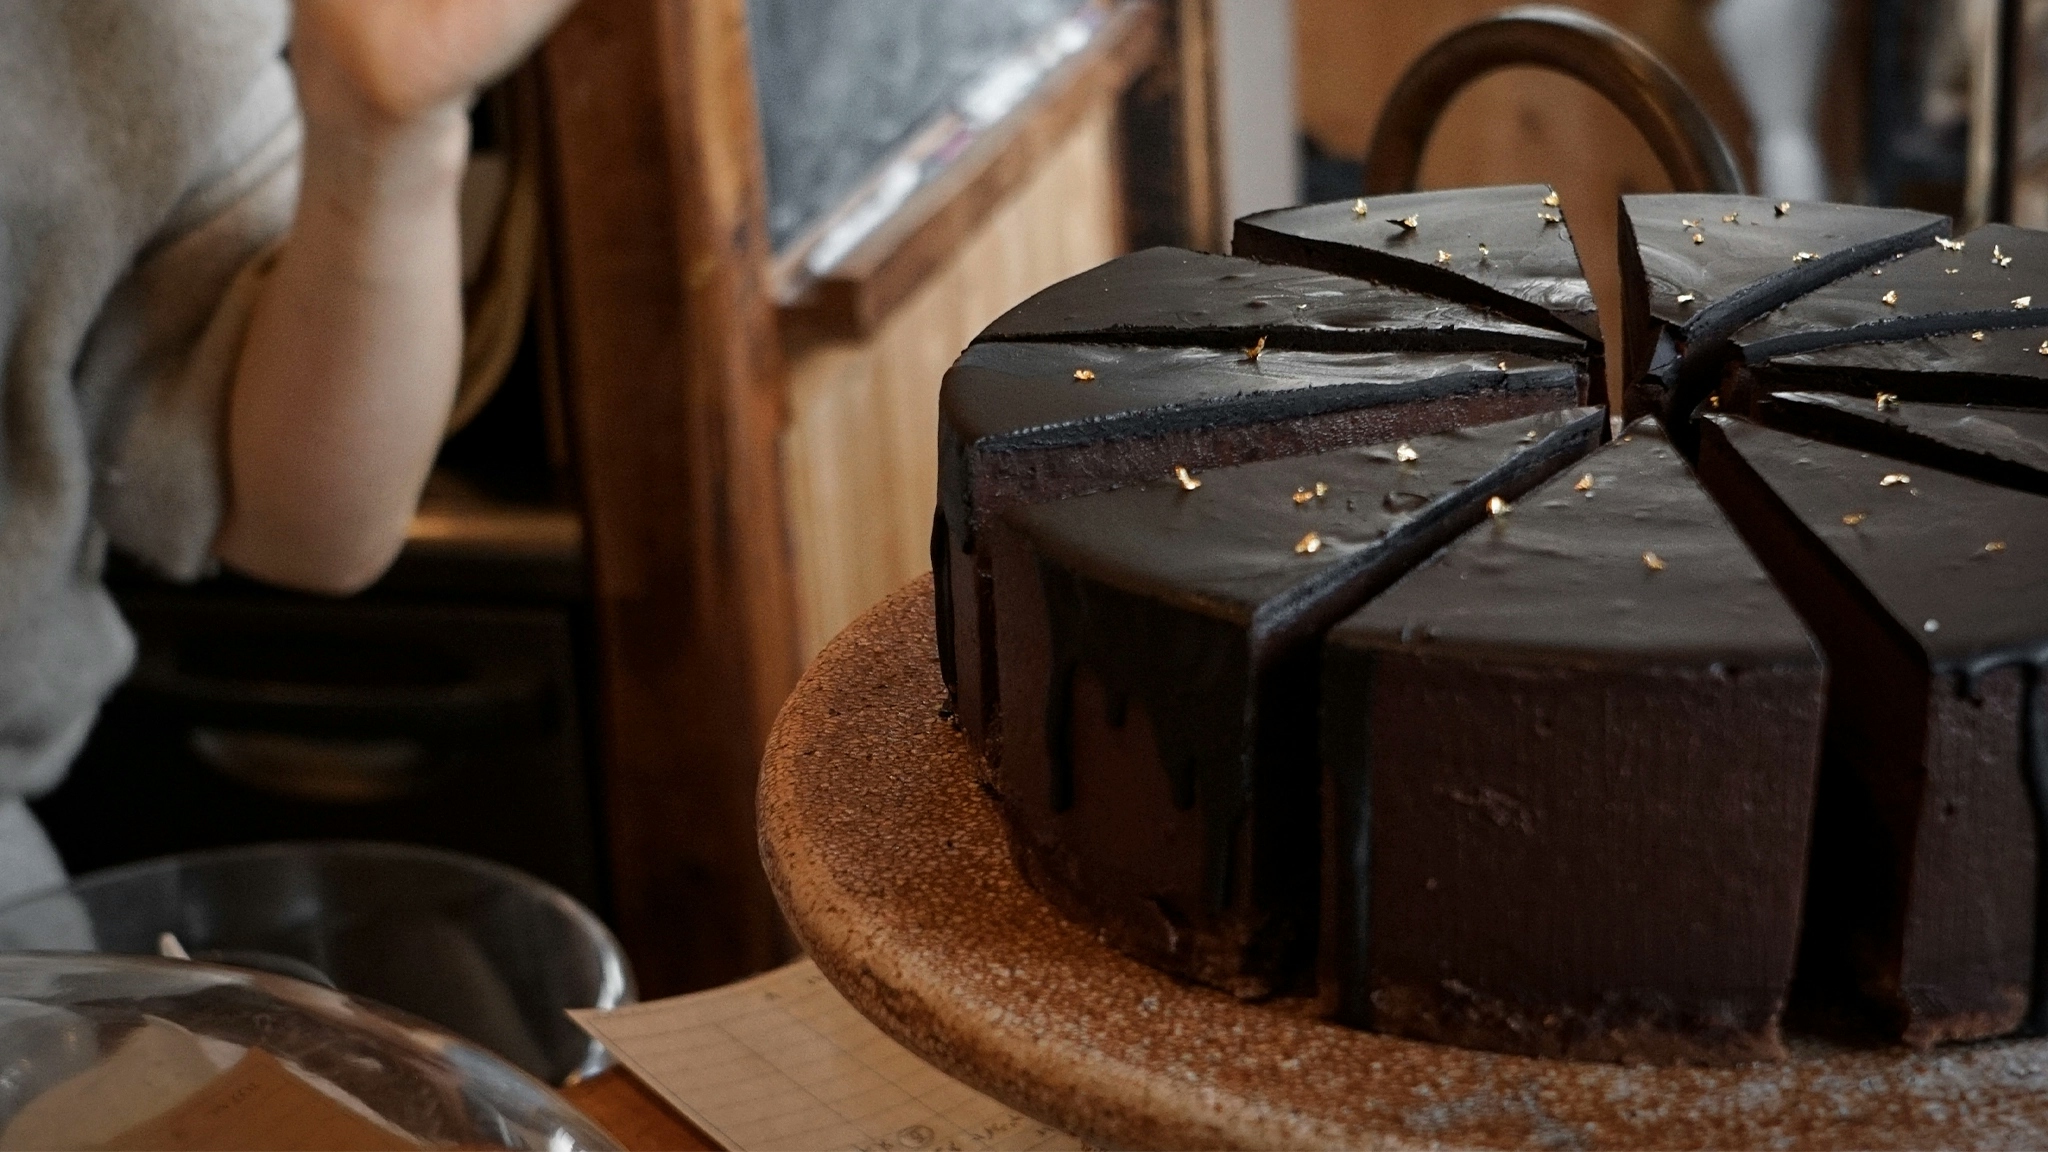 A decadent chococlate cakes sits on a counter, uncovered and ready for a slice to be plated